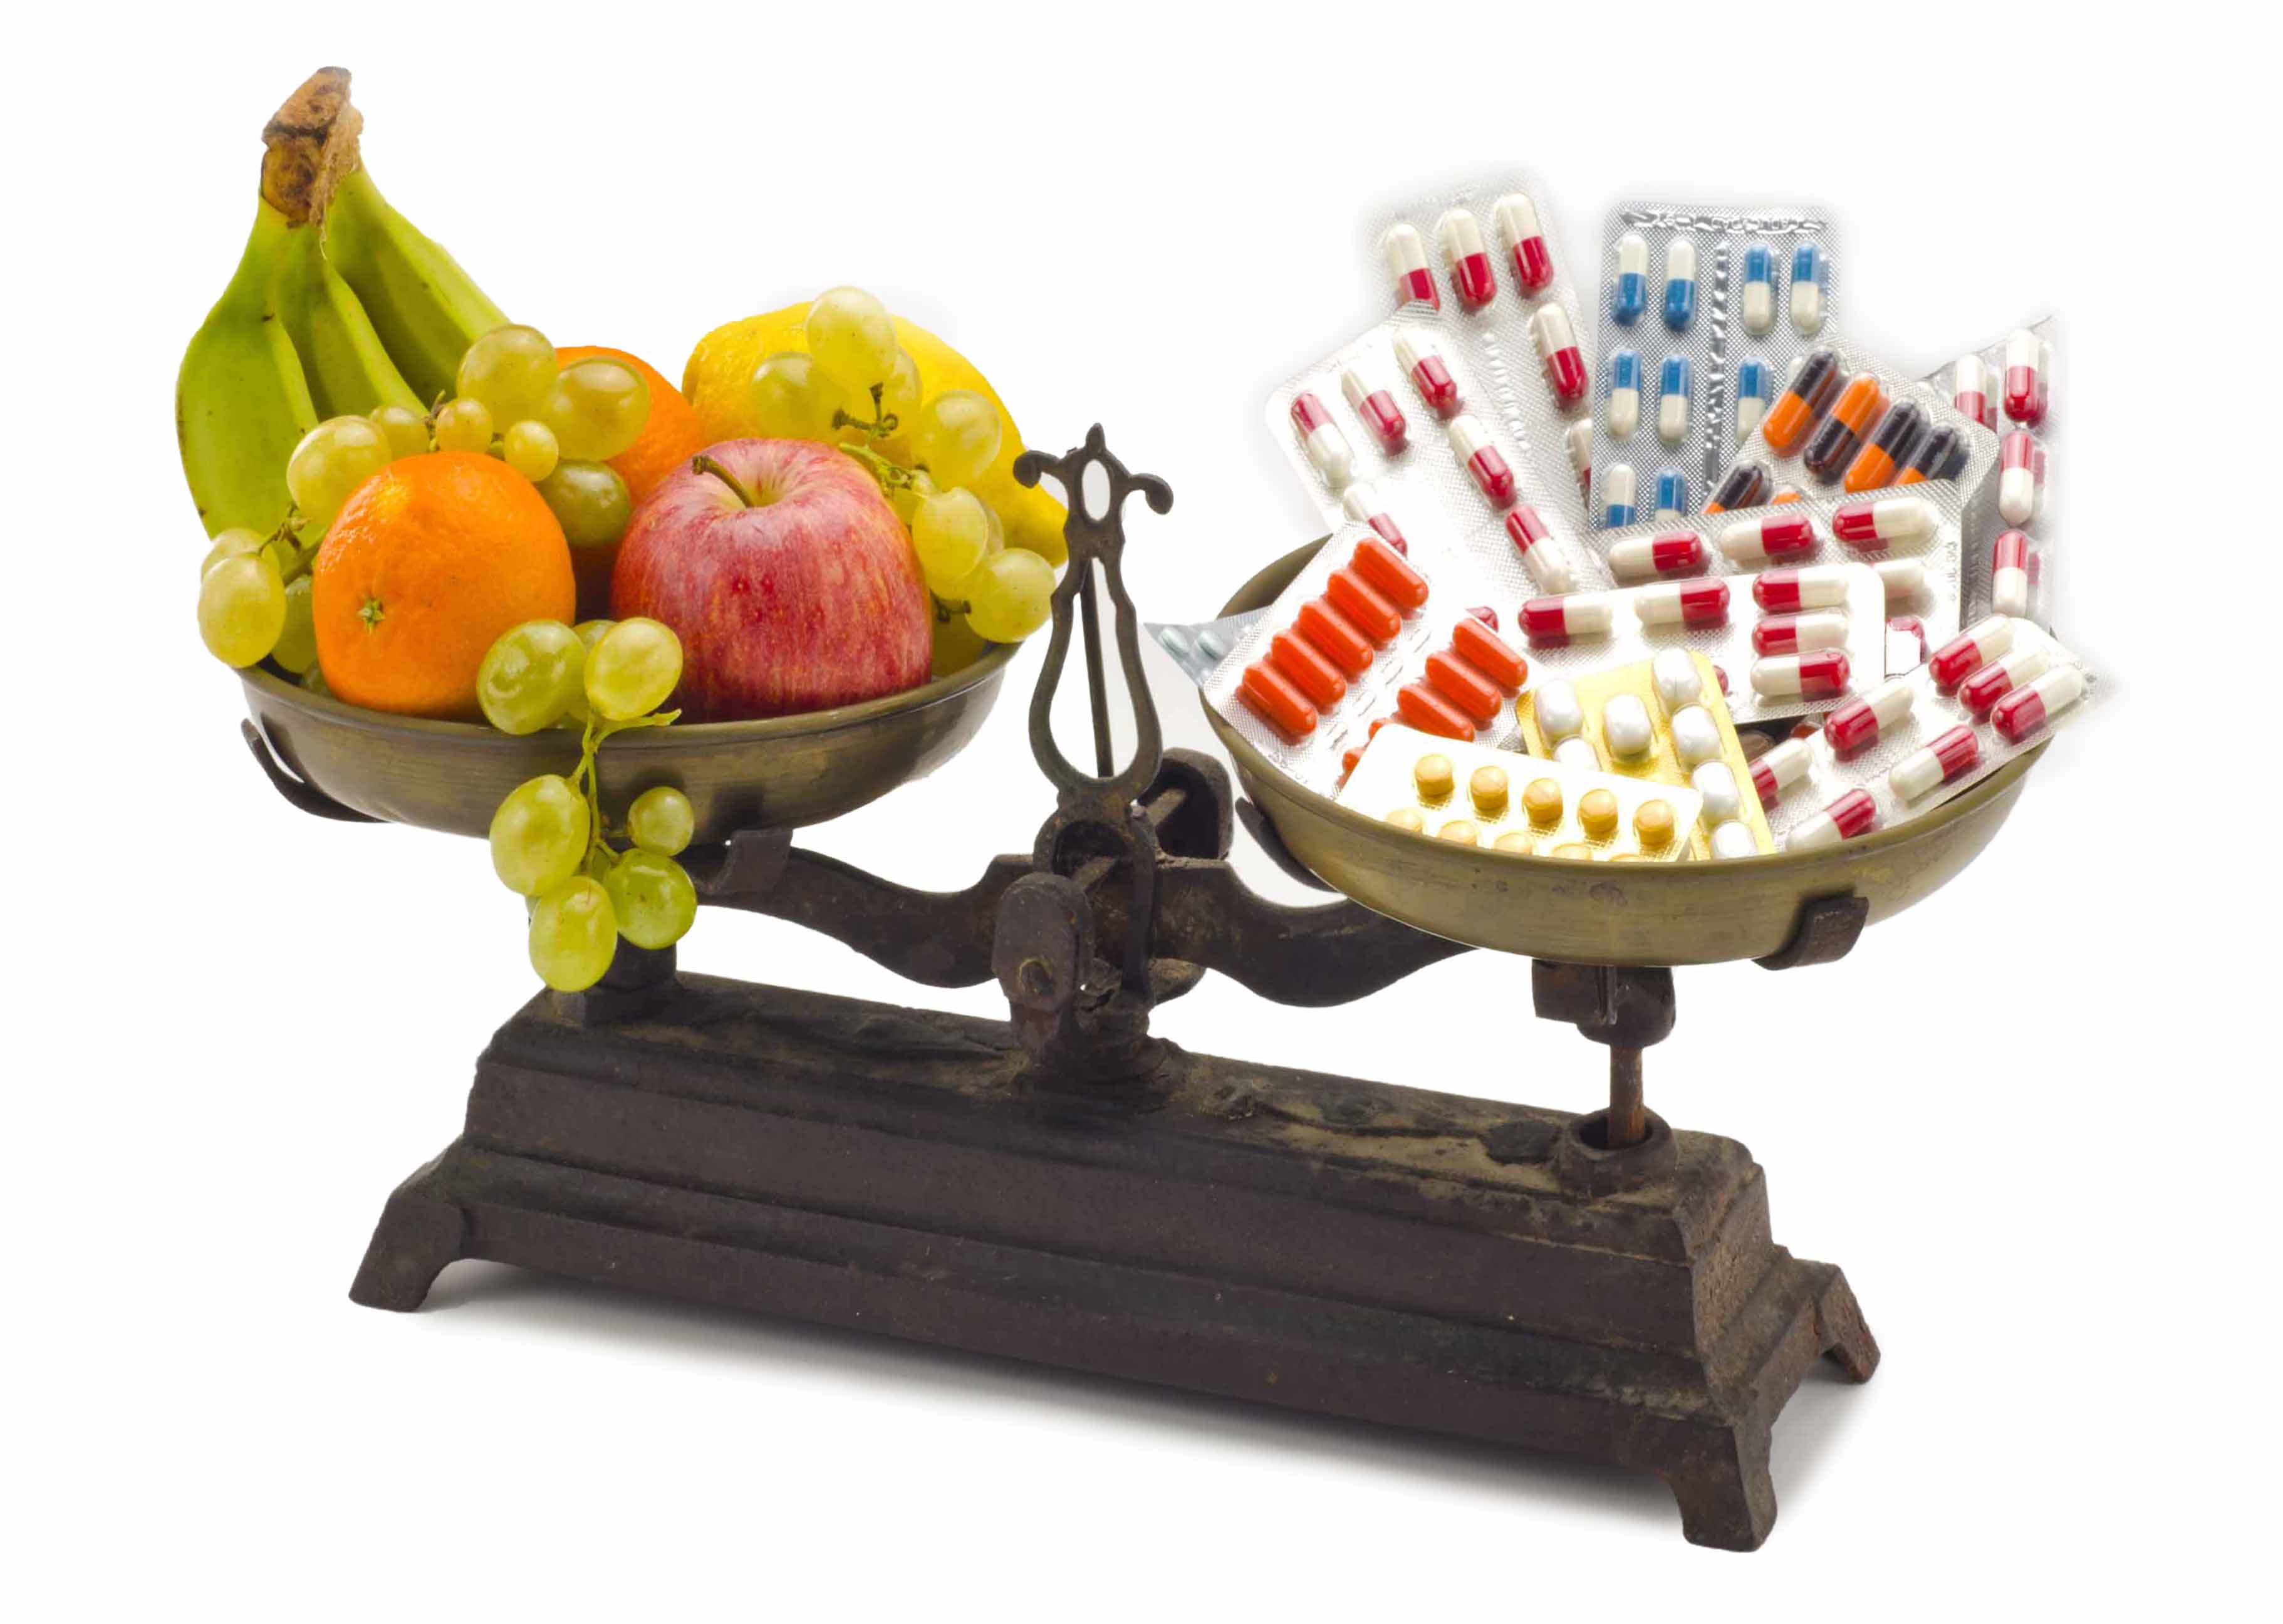 A bowl of food and a bowl of vitamins on a balance scale